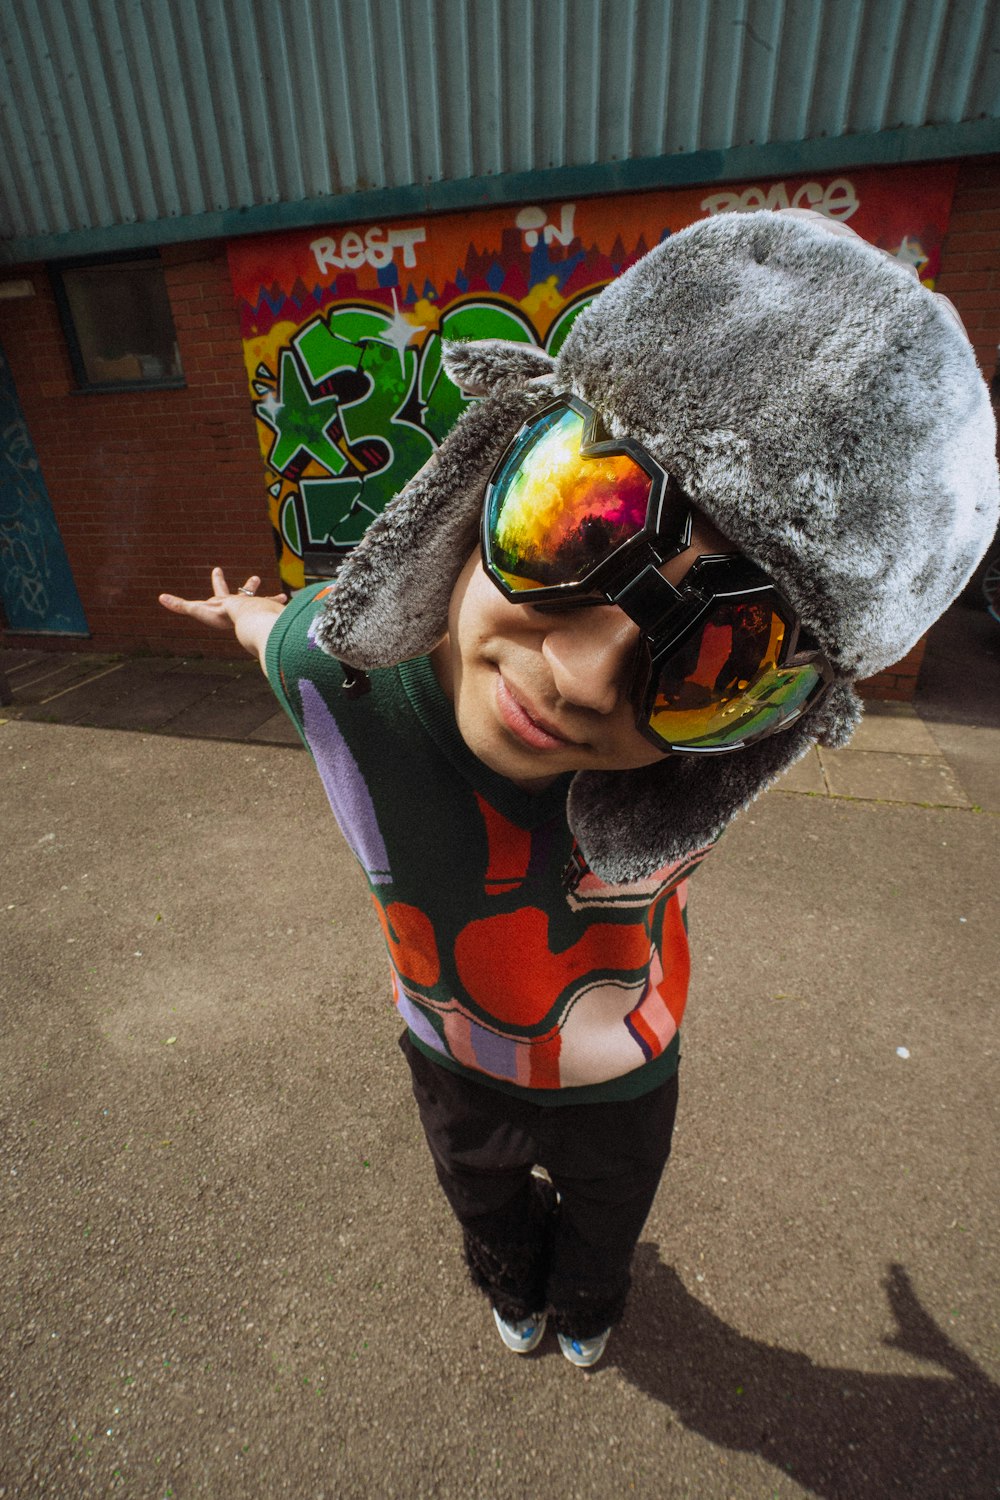 a young boy wearing sunglasses and a hat